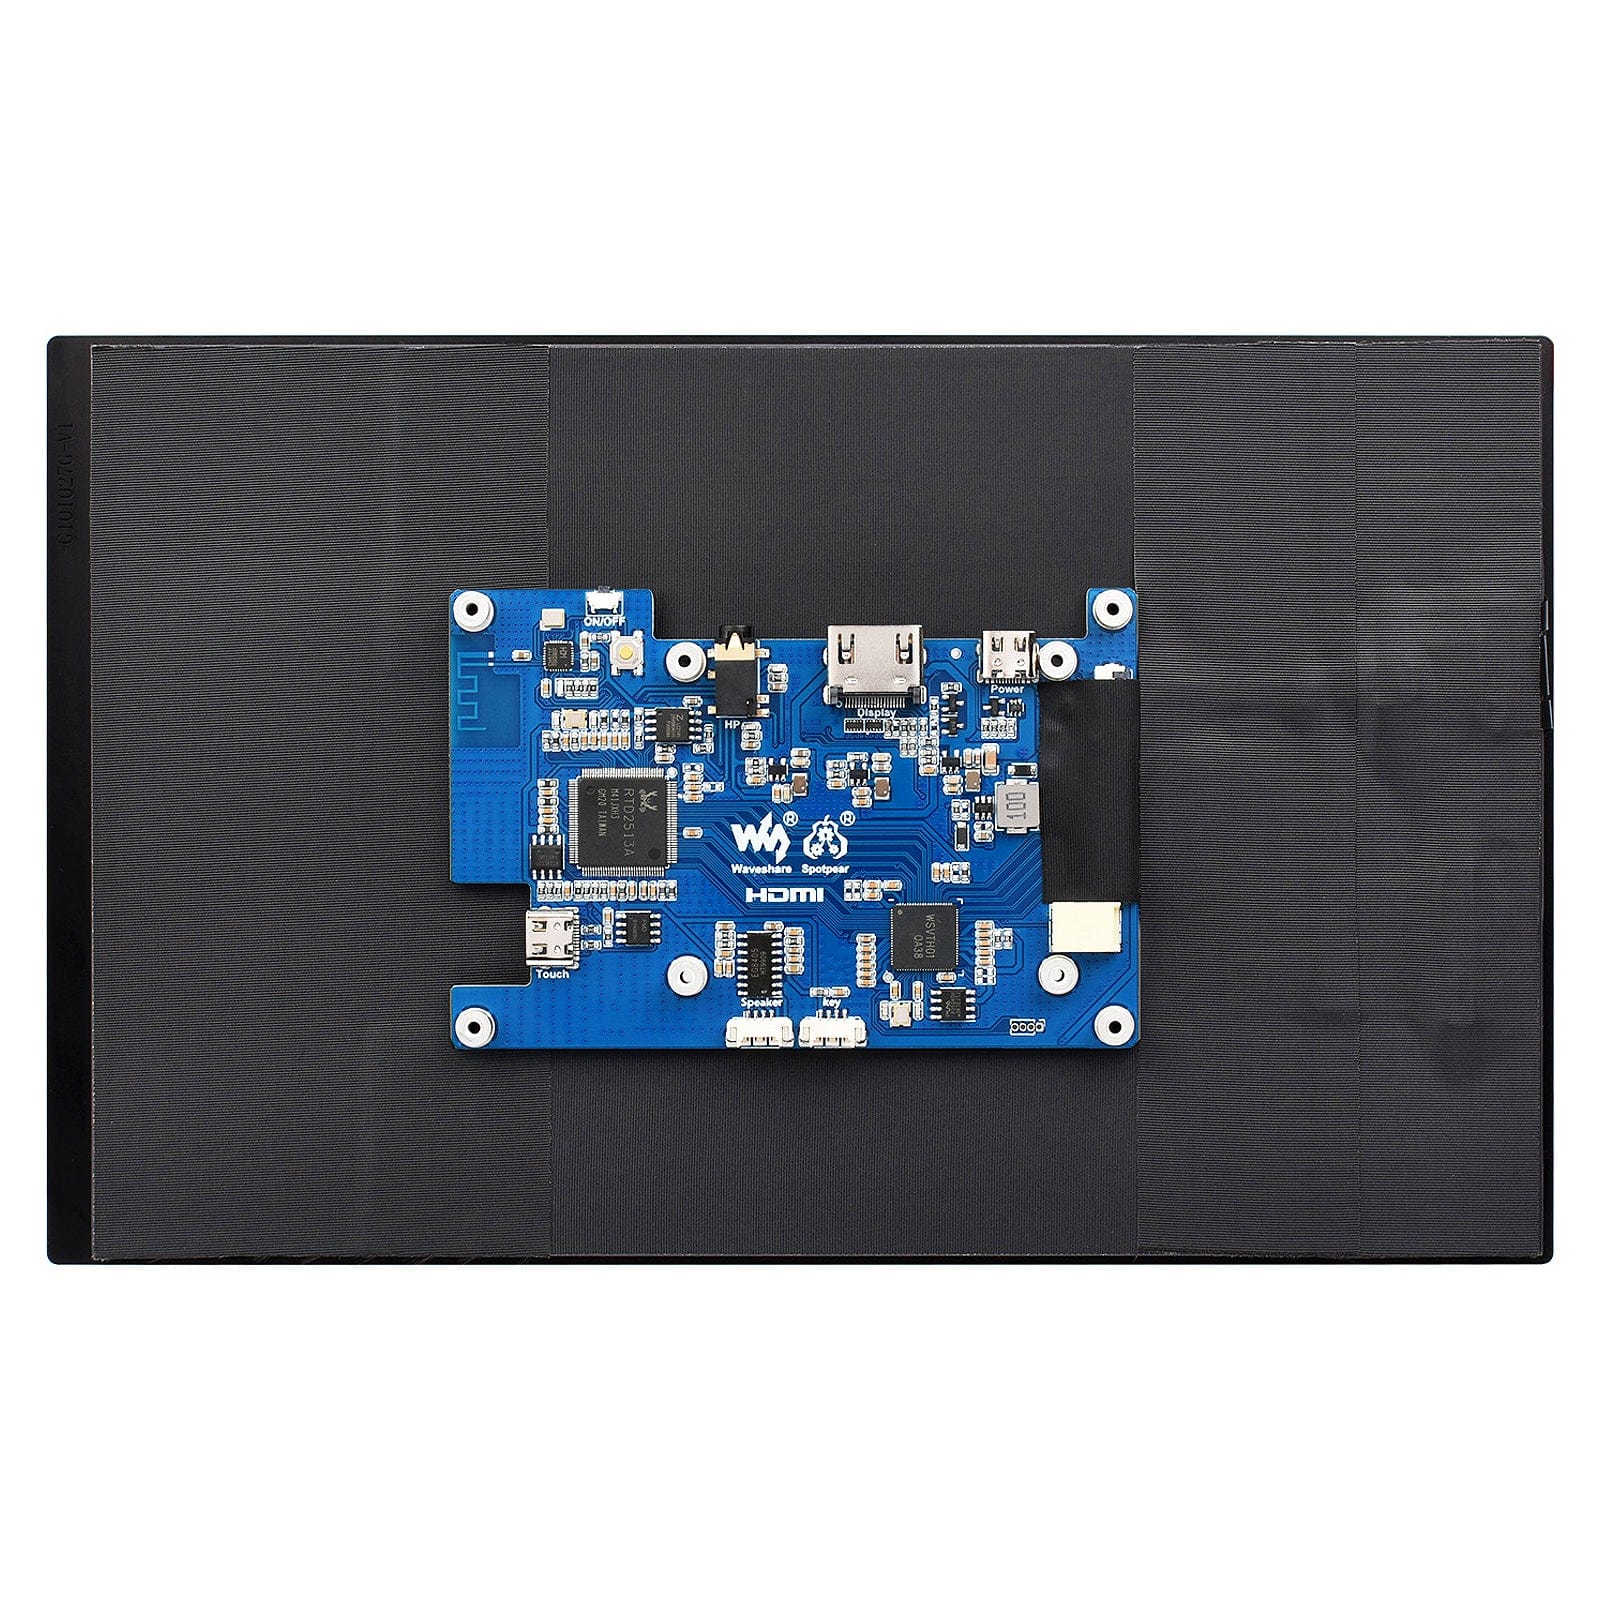 10.1" IPS HDMI Capacitive Touch Display - The Pi Hut